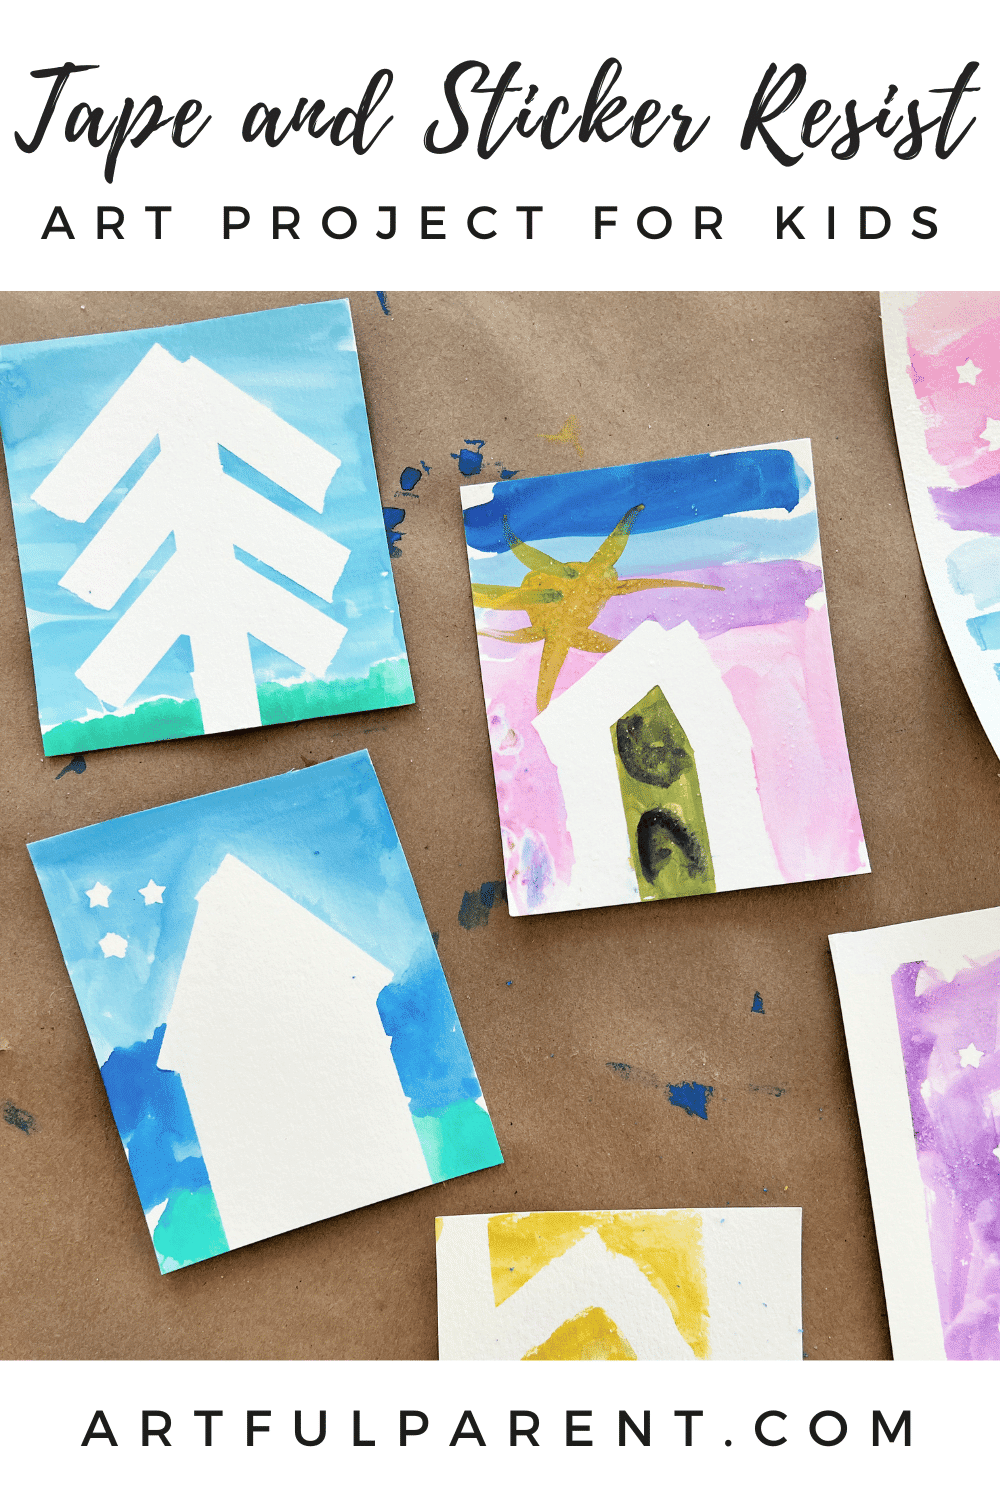 How to Make Watercolor Resist Artwork with Tape and Stickers